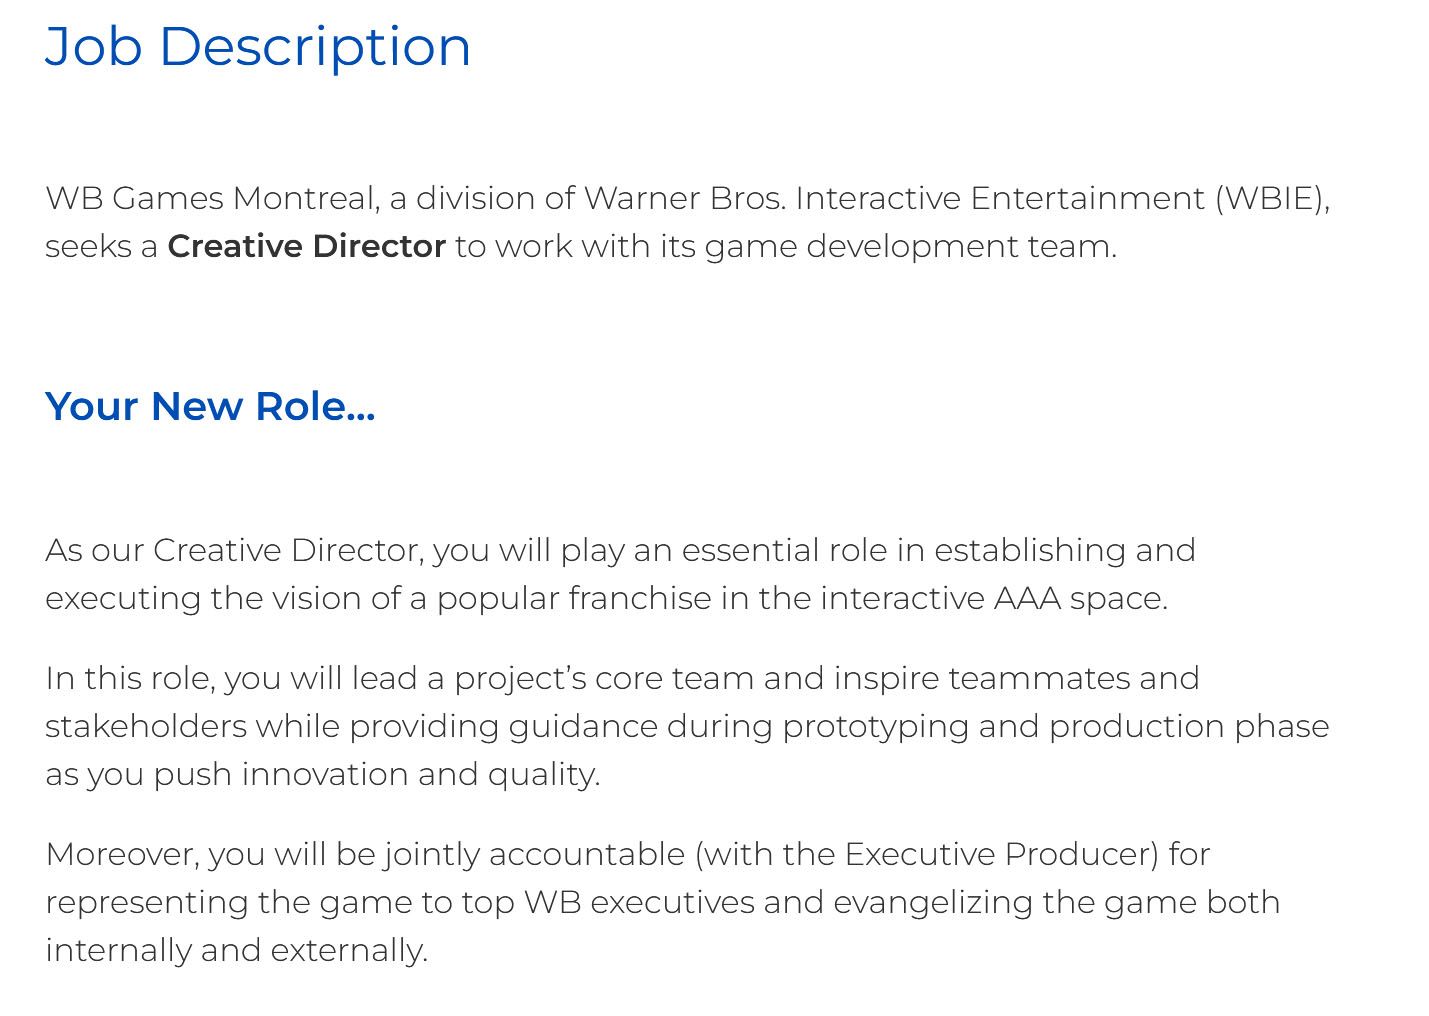 A screenshot of a job listing at WB Games Montreal for a Creative Director.